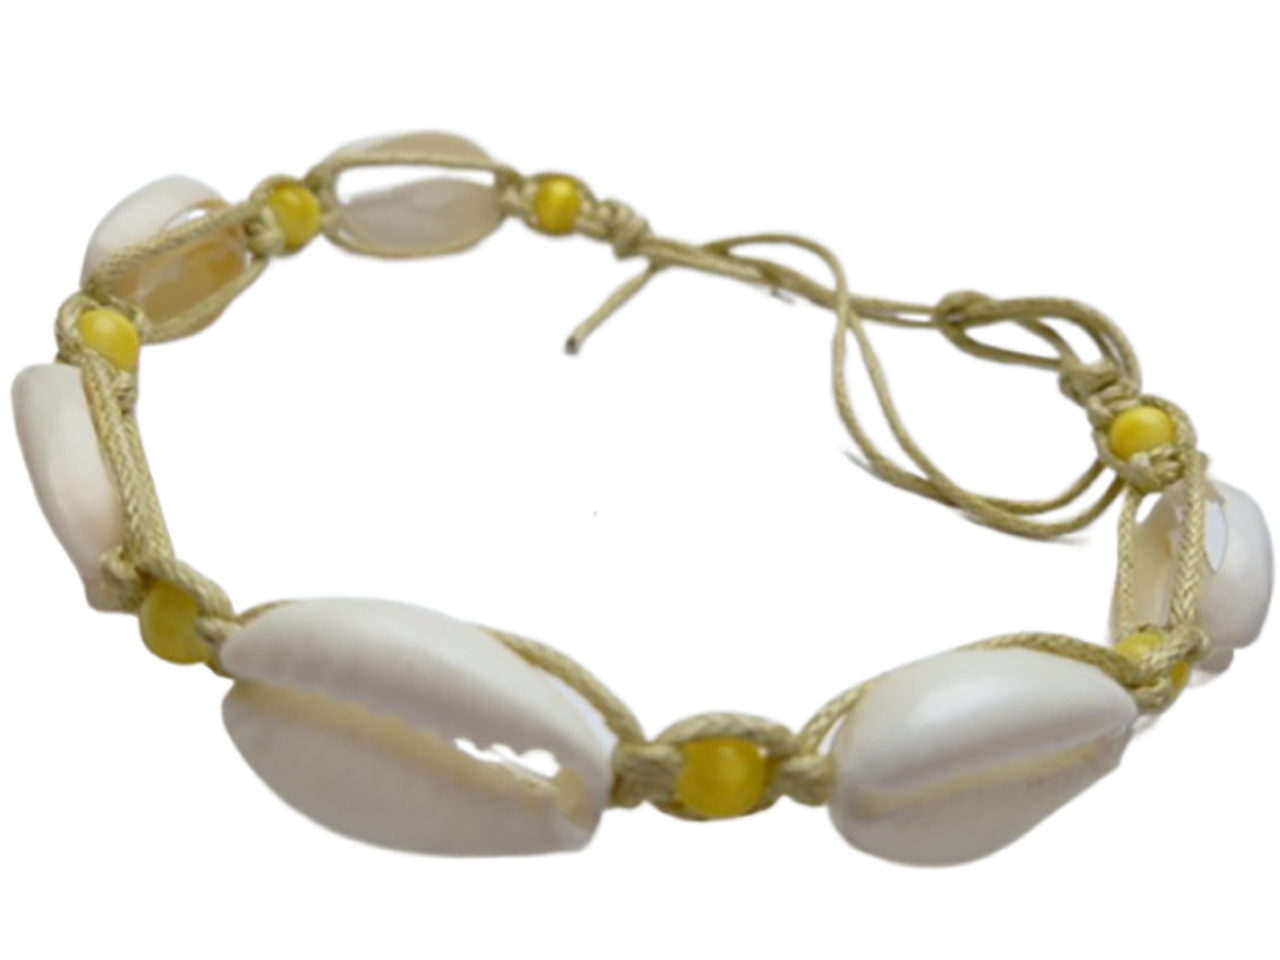 Natural Cowrie Shell Bracelet / Anklet w/ Yellow Beads